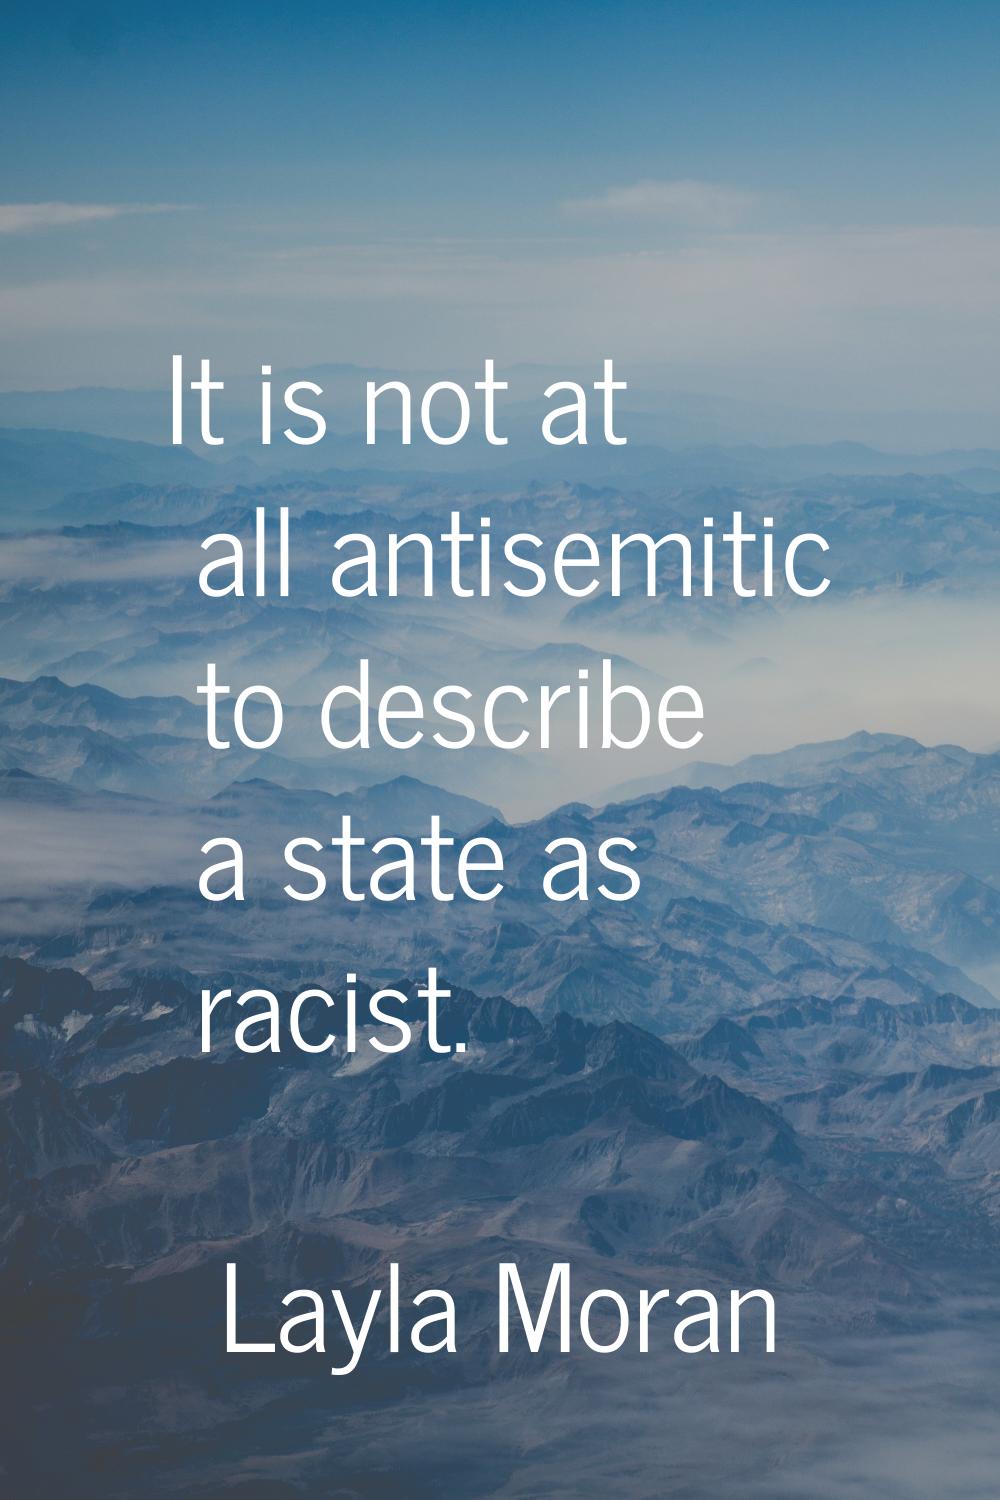 It is not at all antisemitic to describe a state as racist.